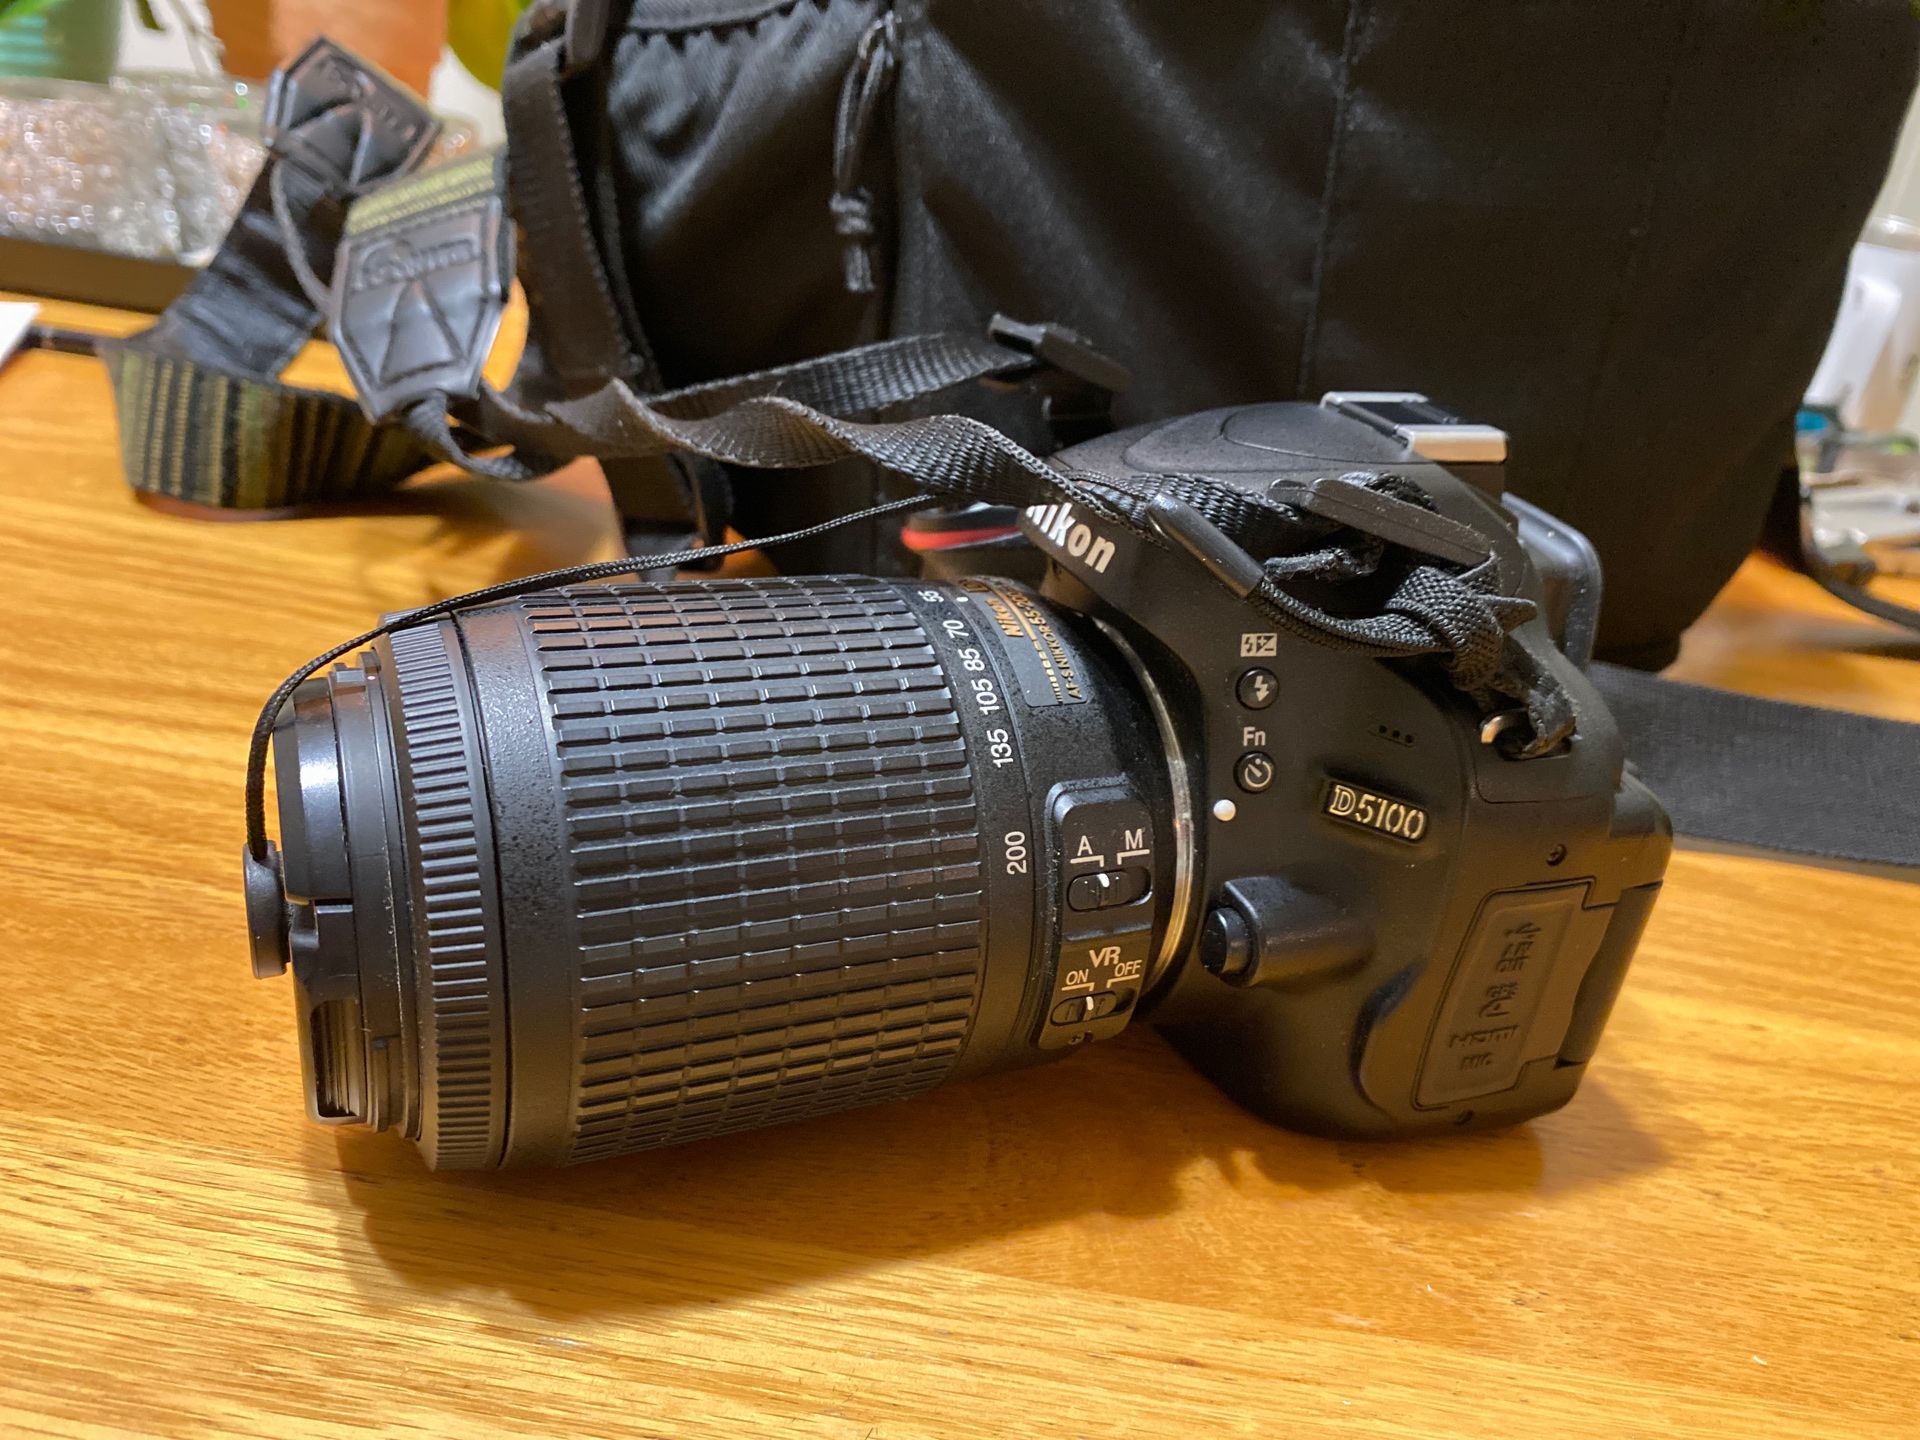 D5100 Nikon camera with 2 lenses and case